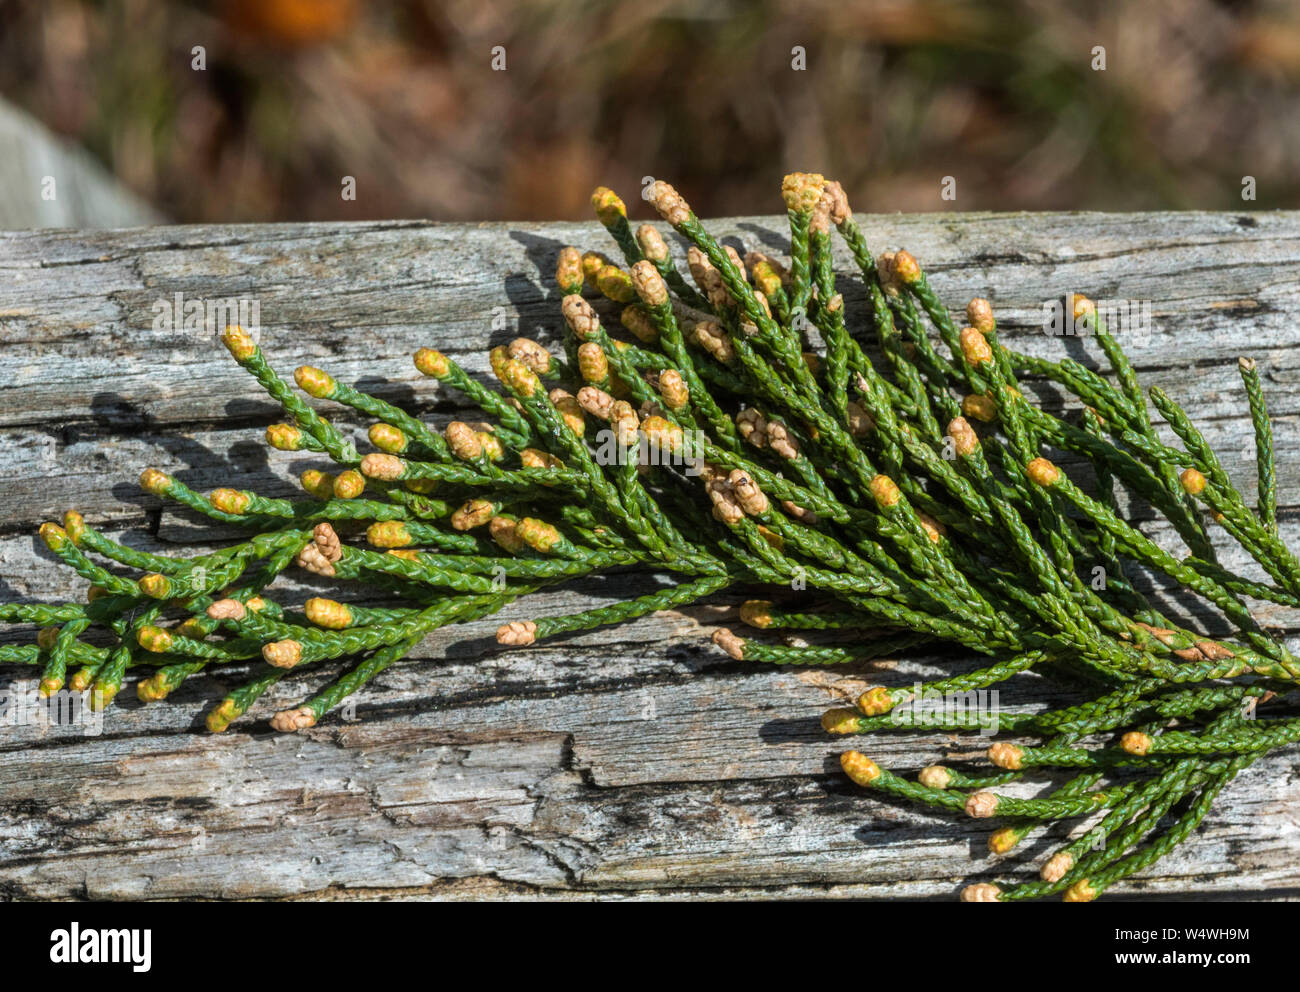 Tiny seeds from a cypress tree. Stock Photo